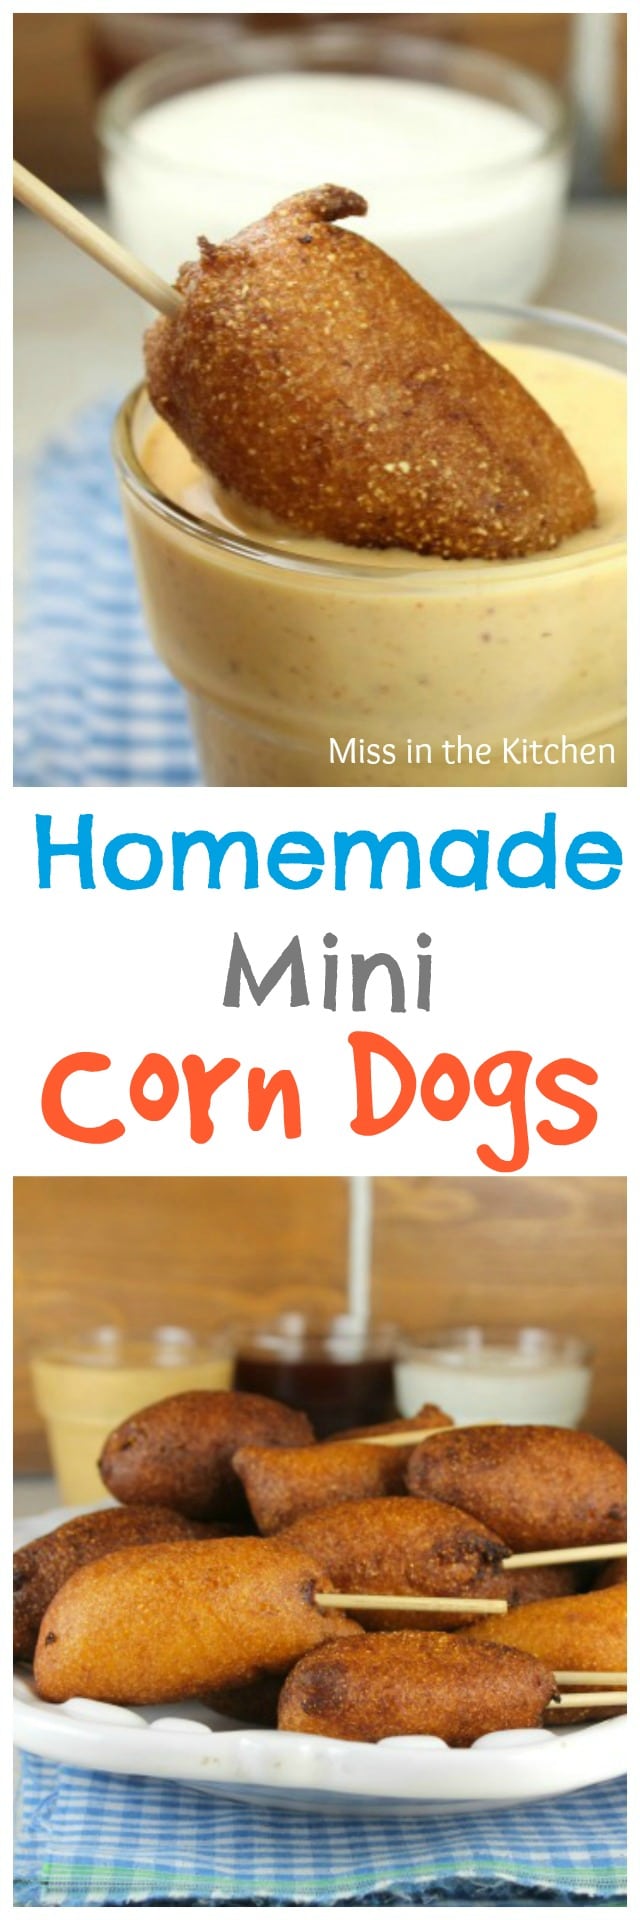 Homemade Mini Corn Dogs - Miss in the Kitchen